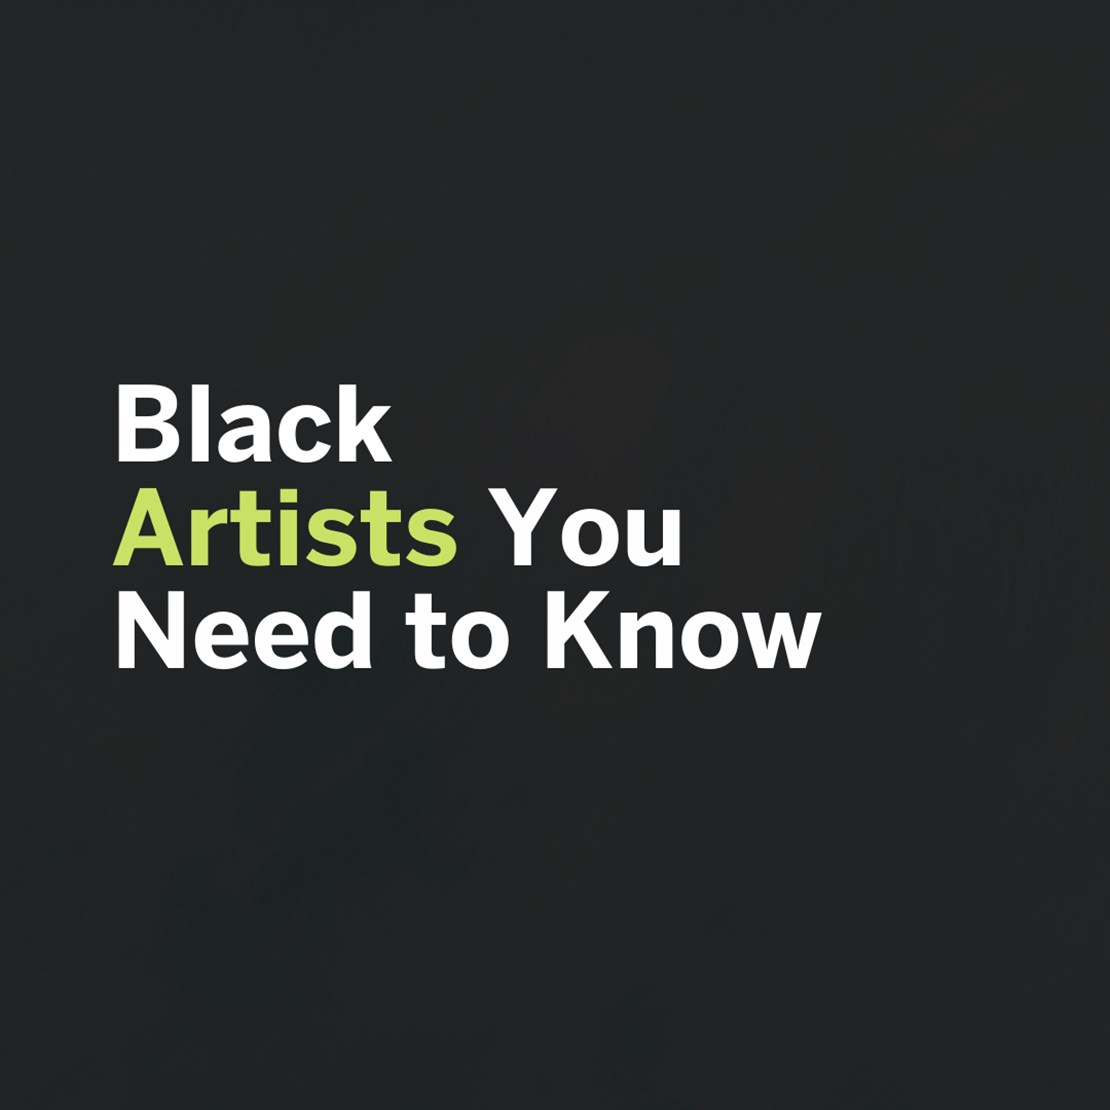 Black Artists You Need to Know